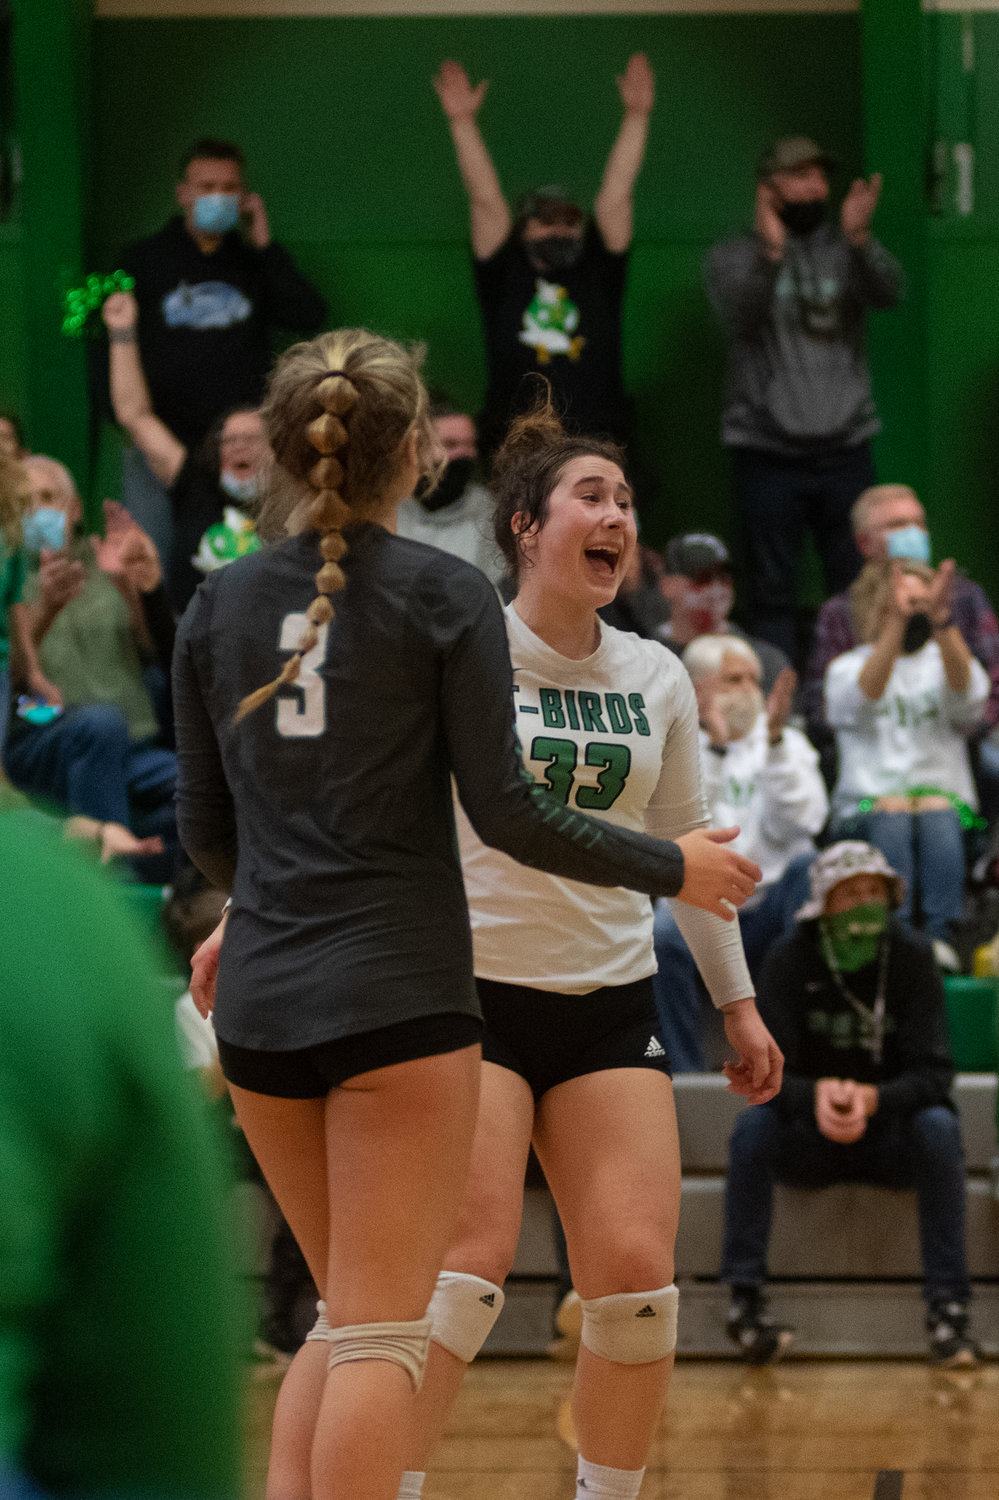 Two Tumwater players celebrate a point against Black Hills in the district playoffs Nov. 13.